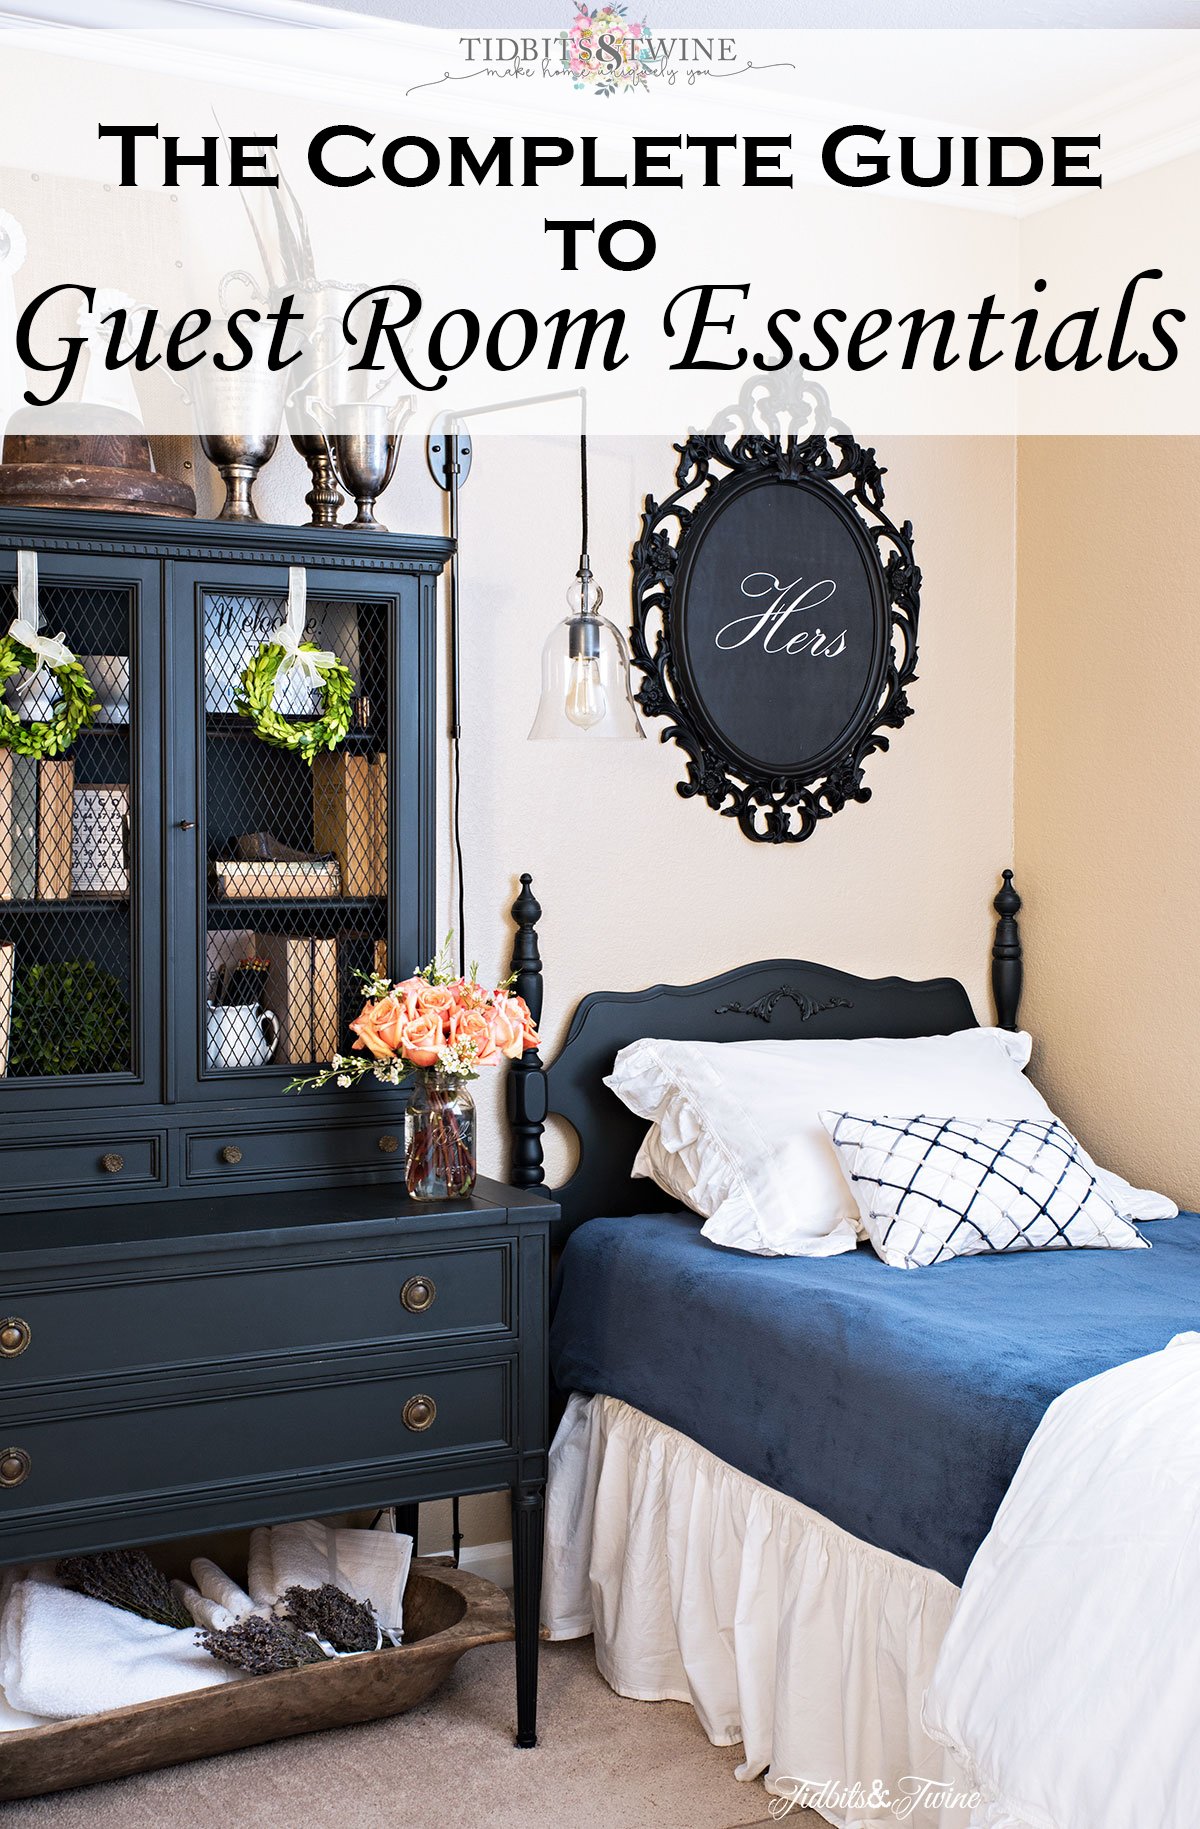 The complete guide to GUEST ROOM ESSENTIALS